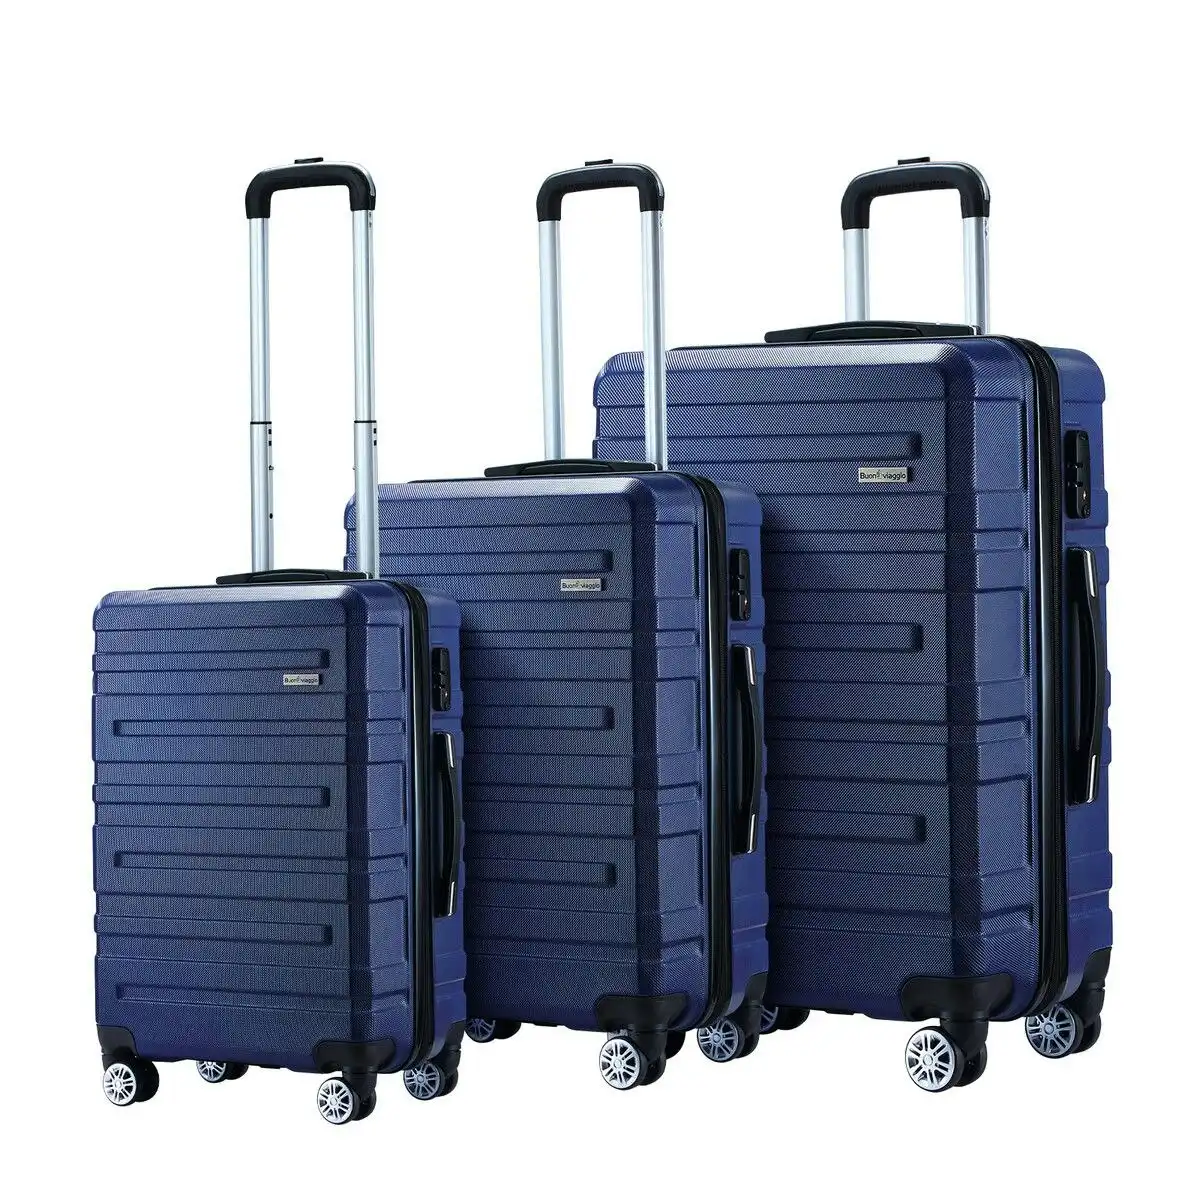 Buon Viaggio 3 Piece Luggage Set Travel Carry On Hard Suitcases Trolley Lightweight with 2 Covers and TSA Lock Navy Blue